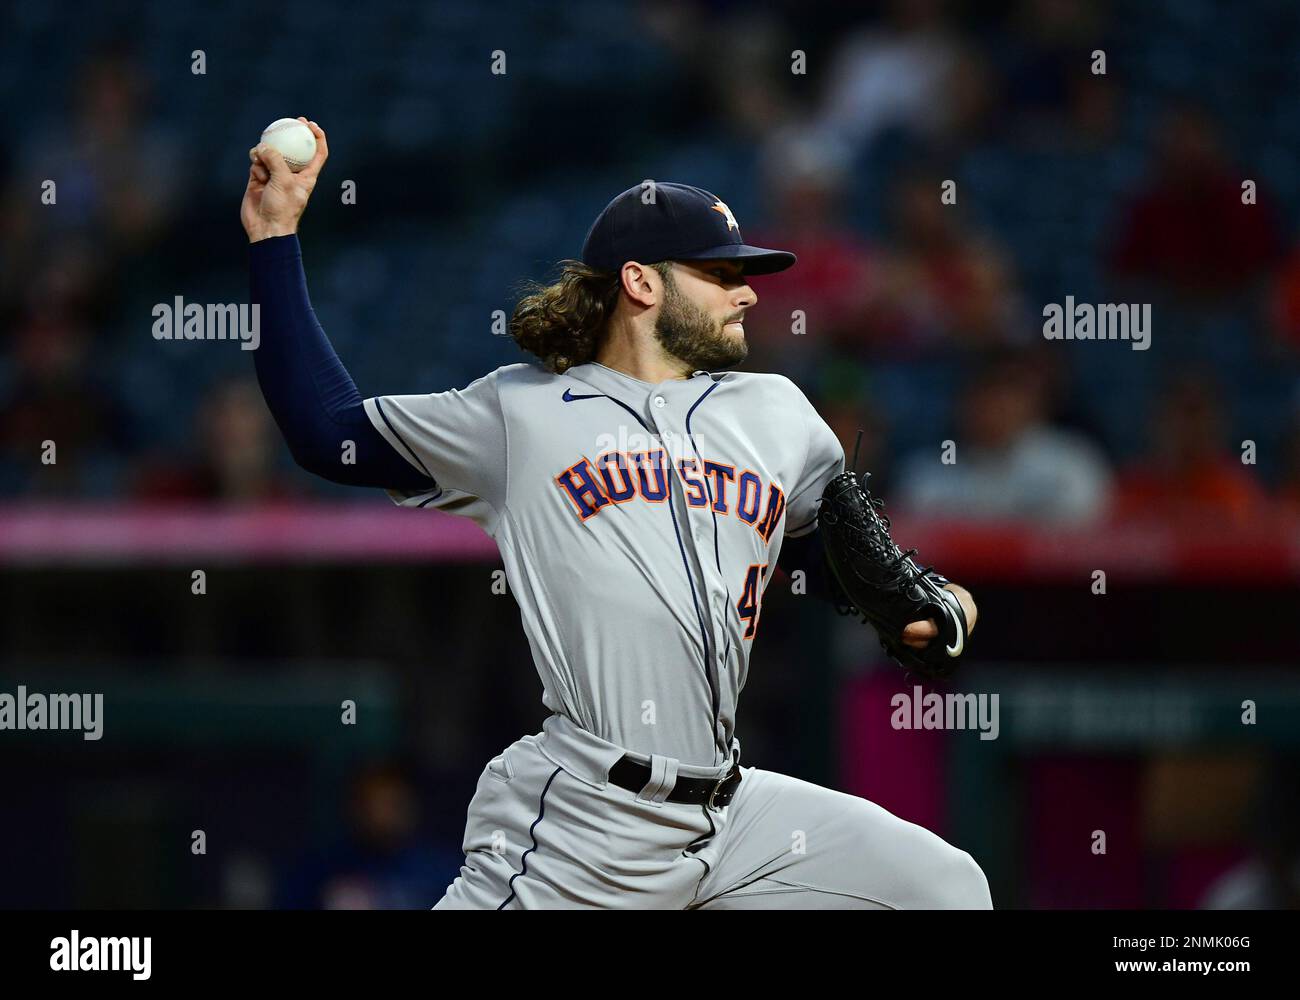 ANAHEIM, CA - SEPTEMBER 23: Houston Astros pitcher Lance McCullers Jr. (43)  pitching during a game against the Los Angels Angels played on September  23, 2021 at Angel Stadium in Anaheim, CA. (